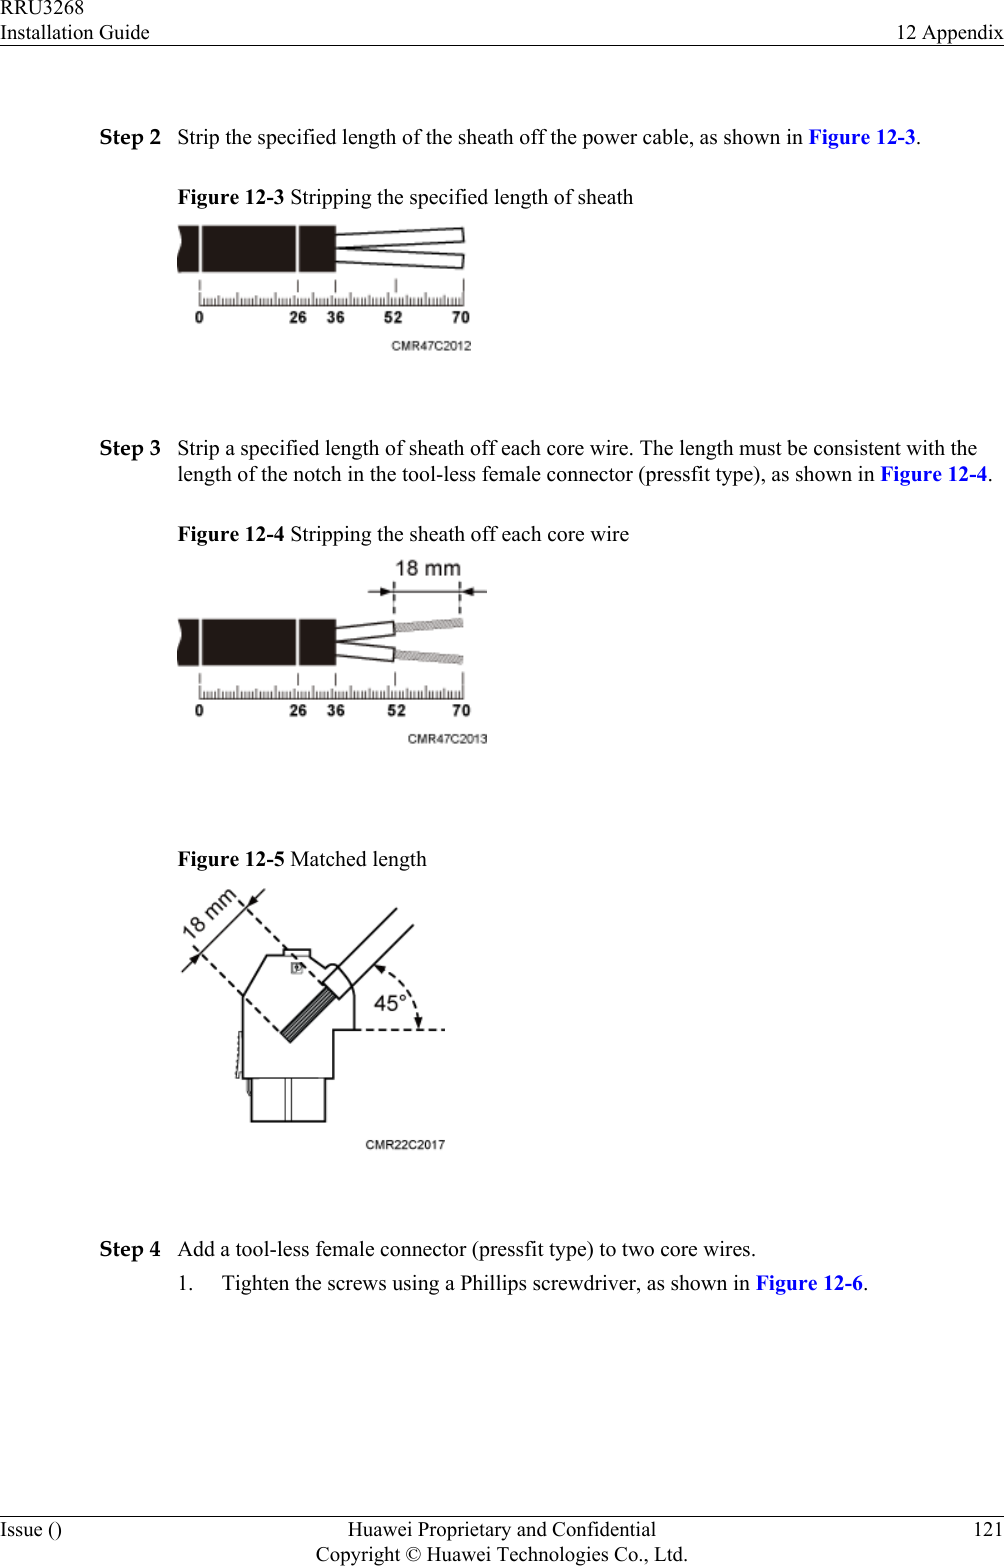  Step 2 Strip the specified length of the sheath off the power cable, as shown in Figure 12-3.Figure 12-3 Stripping the specified length of sheath Step 3 Strip a specified length of sheath off each core wire. The length must be consistent with thelength of the notch in the tool-less female connector (pressfit type), as shown in Figure 12-4.Figure 12-4 Stripping the sheath off each core wire Figure 12-5 Matched length Step 4 Add a tool-less female connector (pressfit type) to two core wires.1. Tighten the screws using a Phillips screwdriver, as shown in Figure 12-6.RRU3268Installation Guide 12 AppendixIssue () Huawei Proprietary and ConfidentialCopyright © Huawei Technologies Co., Ltd.121